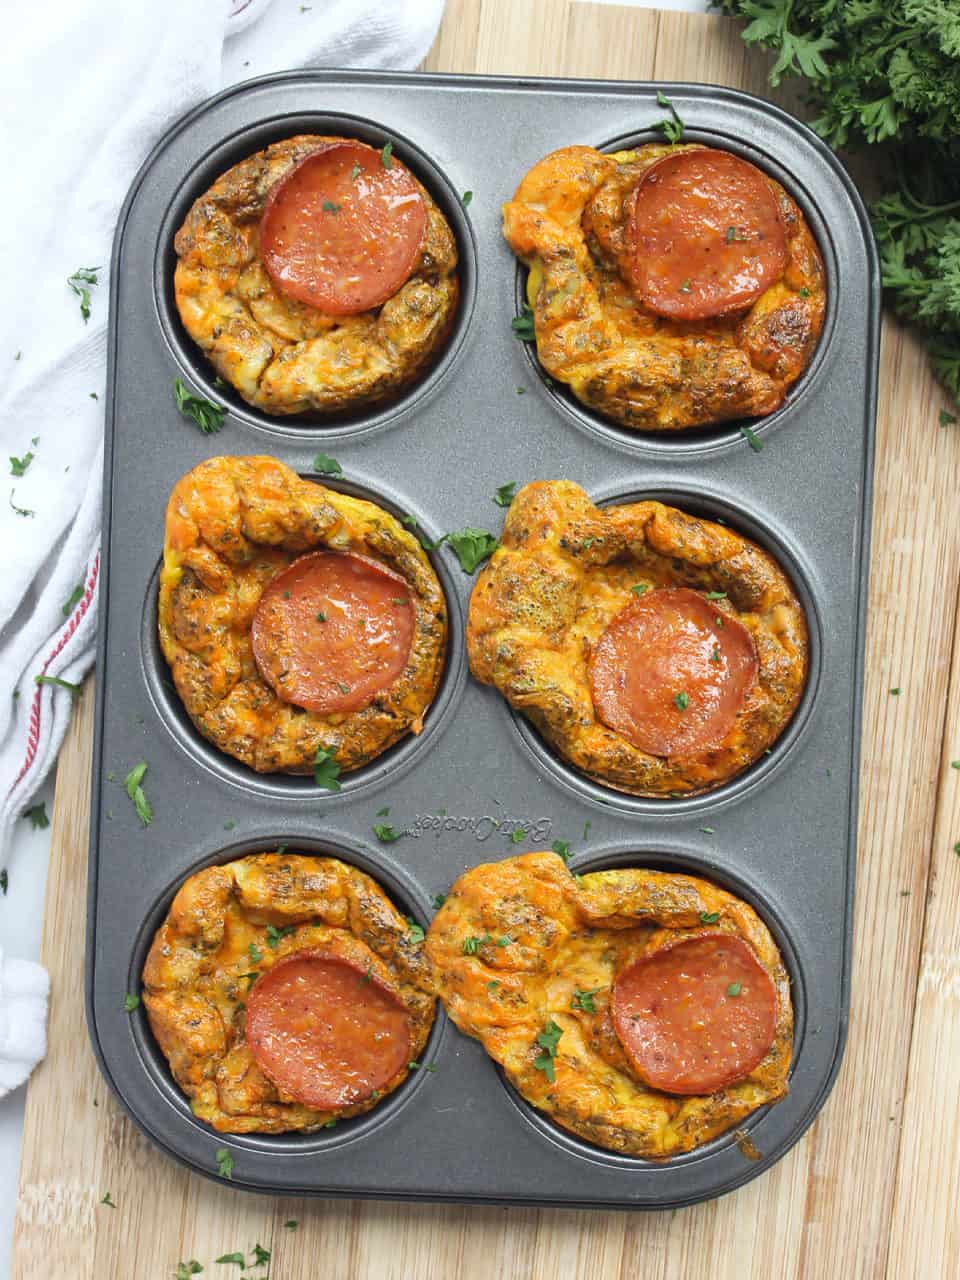 Six baked pizza egg bites in a muffin tin.